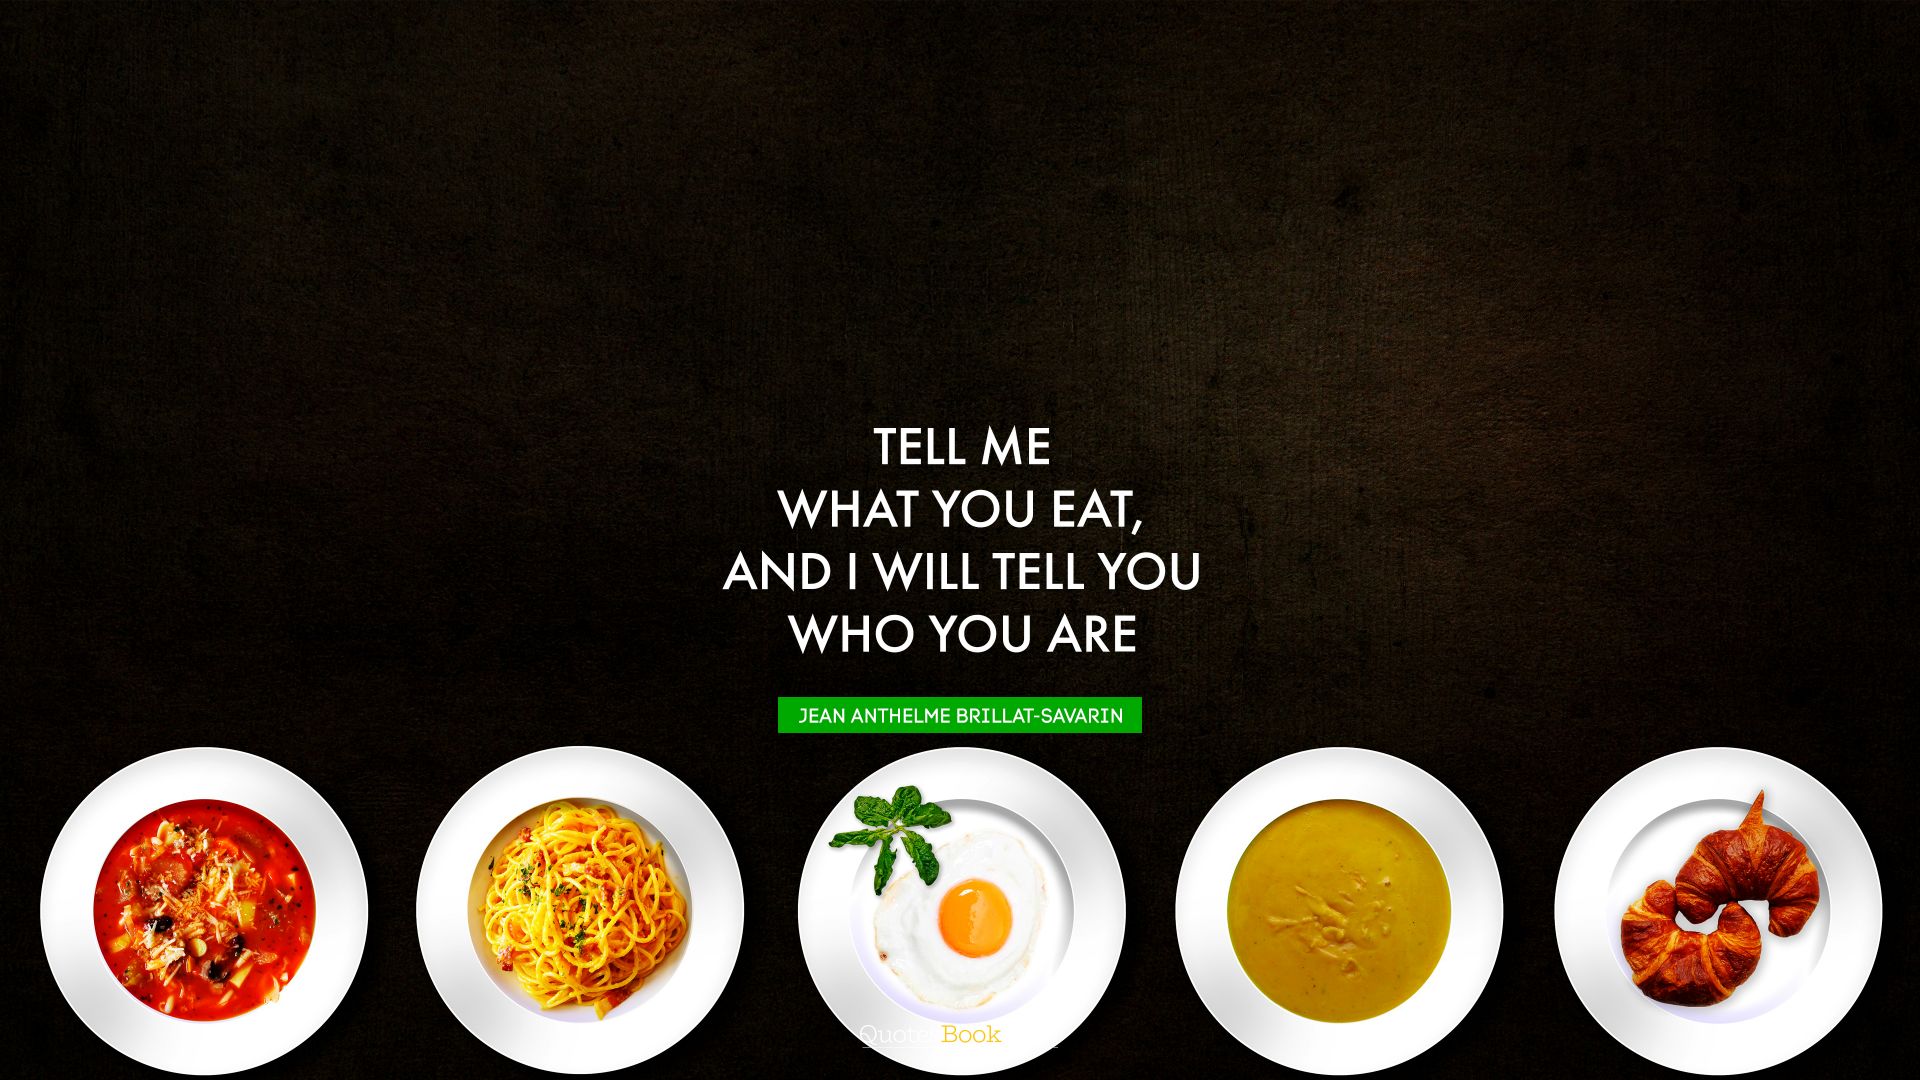 Tell me what you eat, and I will tell you who you are. - Quote by Jean Anthelme Brillat-Savarin